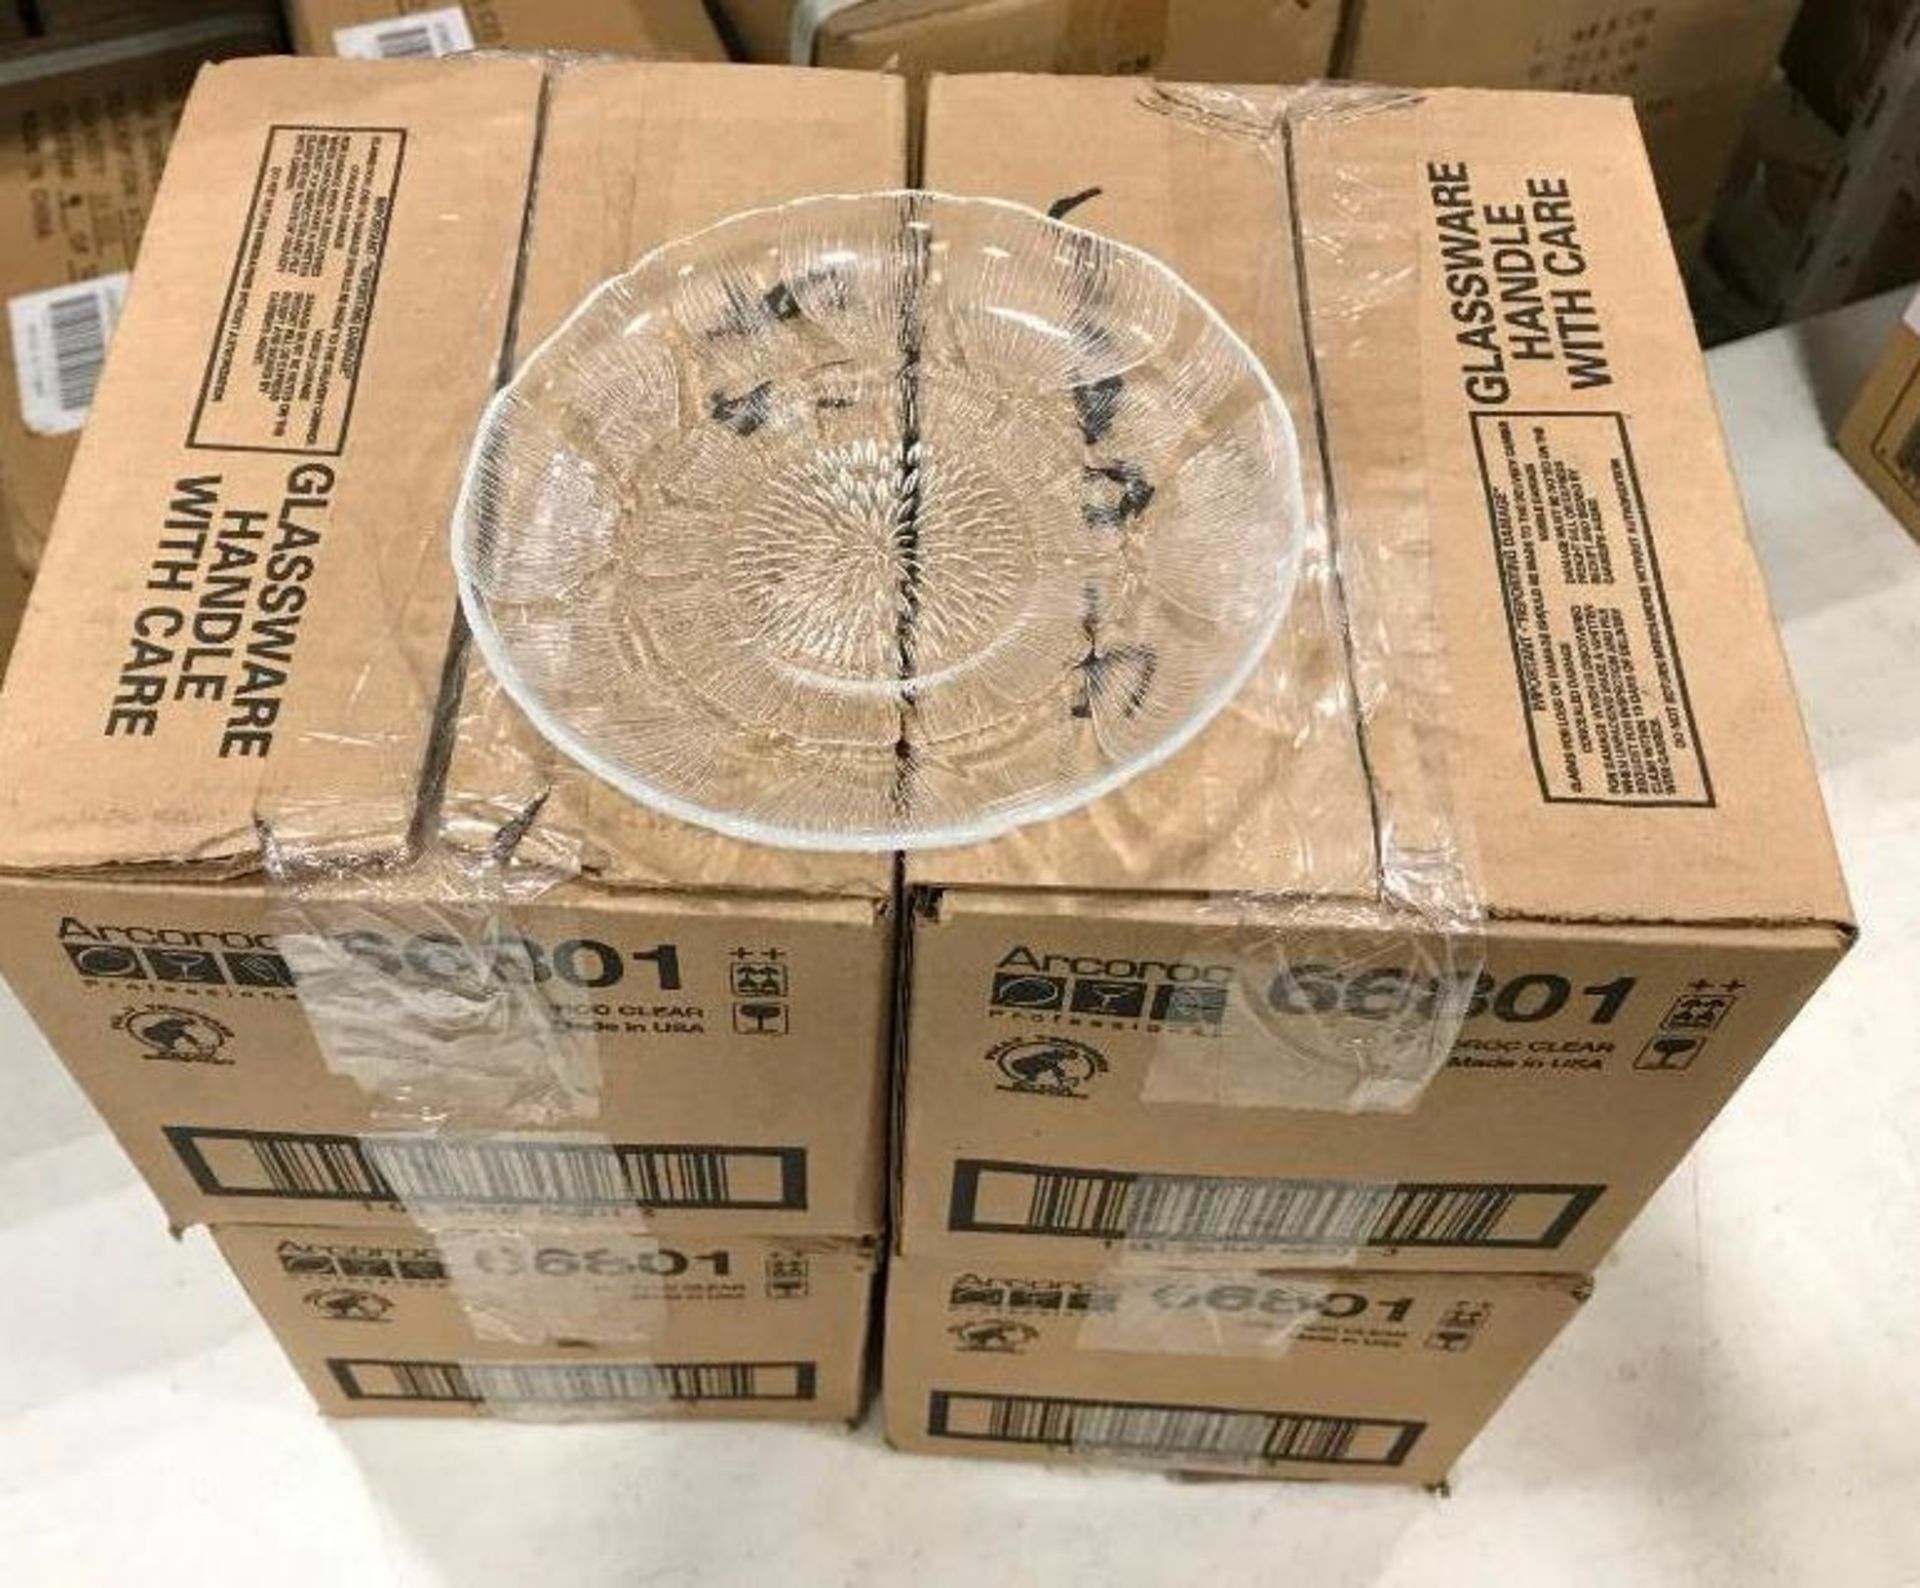 4 CASES OF FLEUR PLATE 5.5" - ARCOROC 66801 - NEW